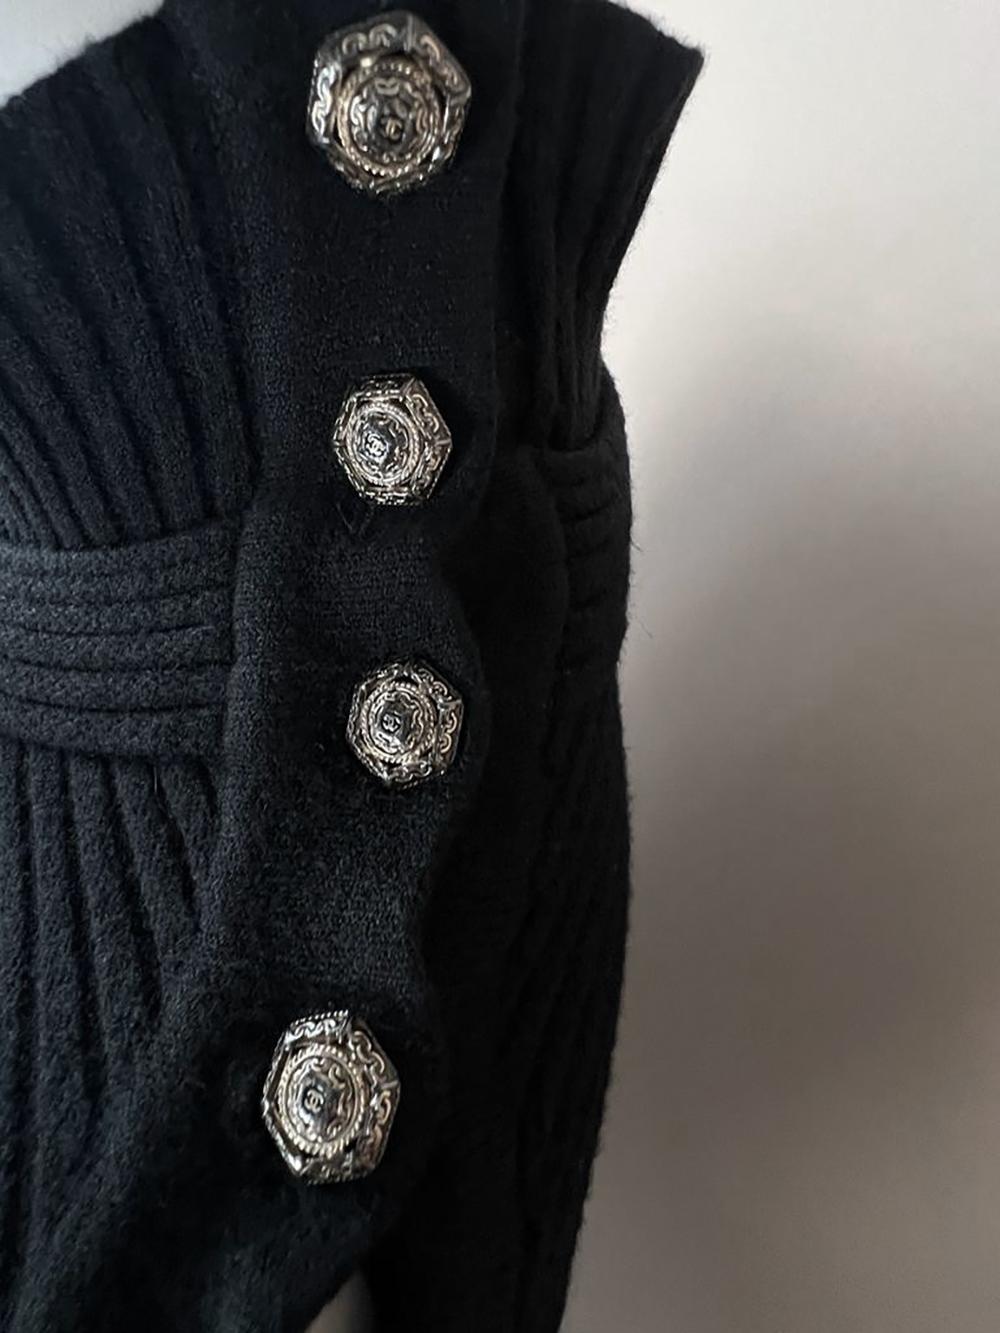 Chanel little black quilted dress from Paris / SHANGHAI Collection
- CC logo buttons 
- embellished with beads
Size mark 40 fr. kept unworn, Condition of a new.